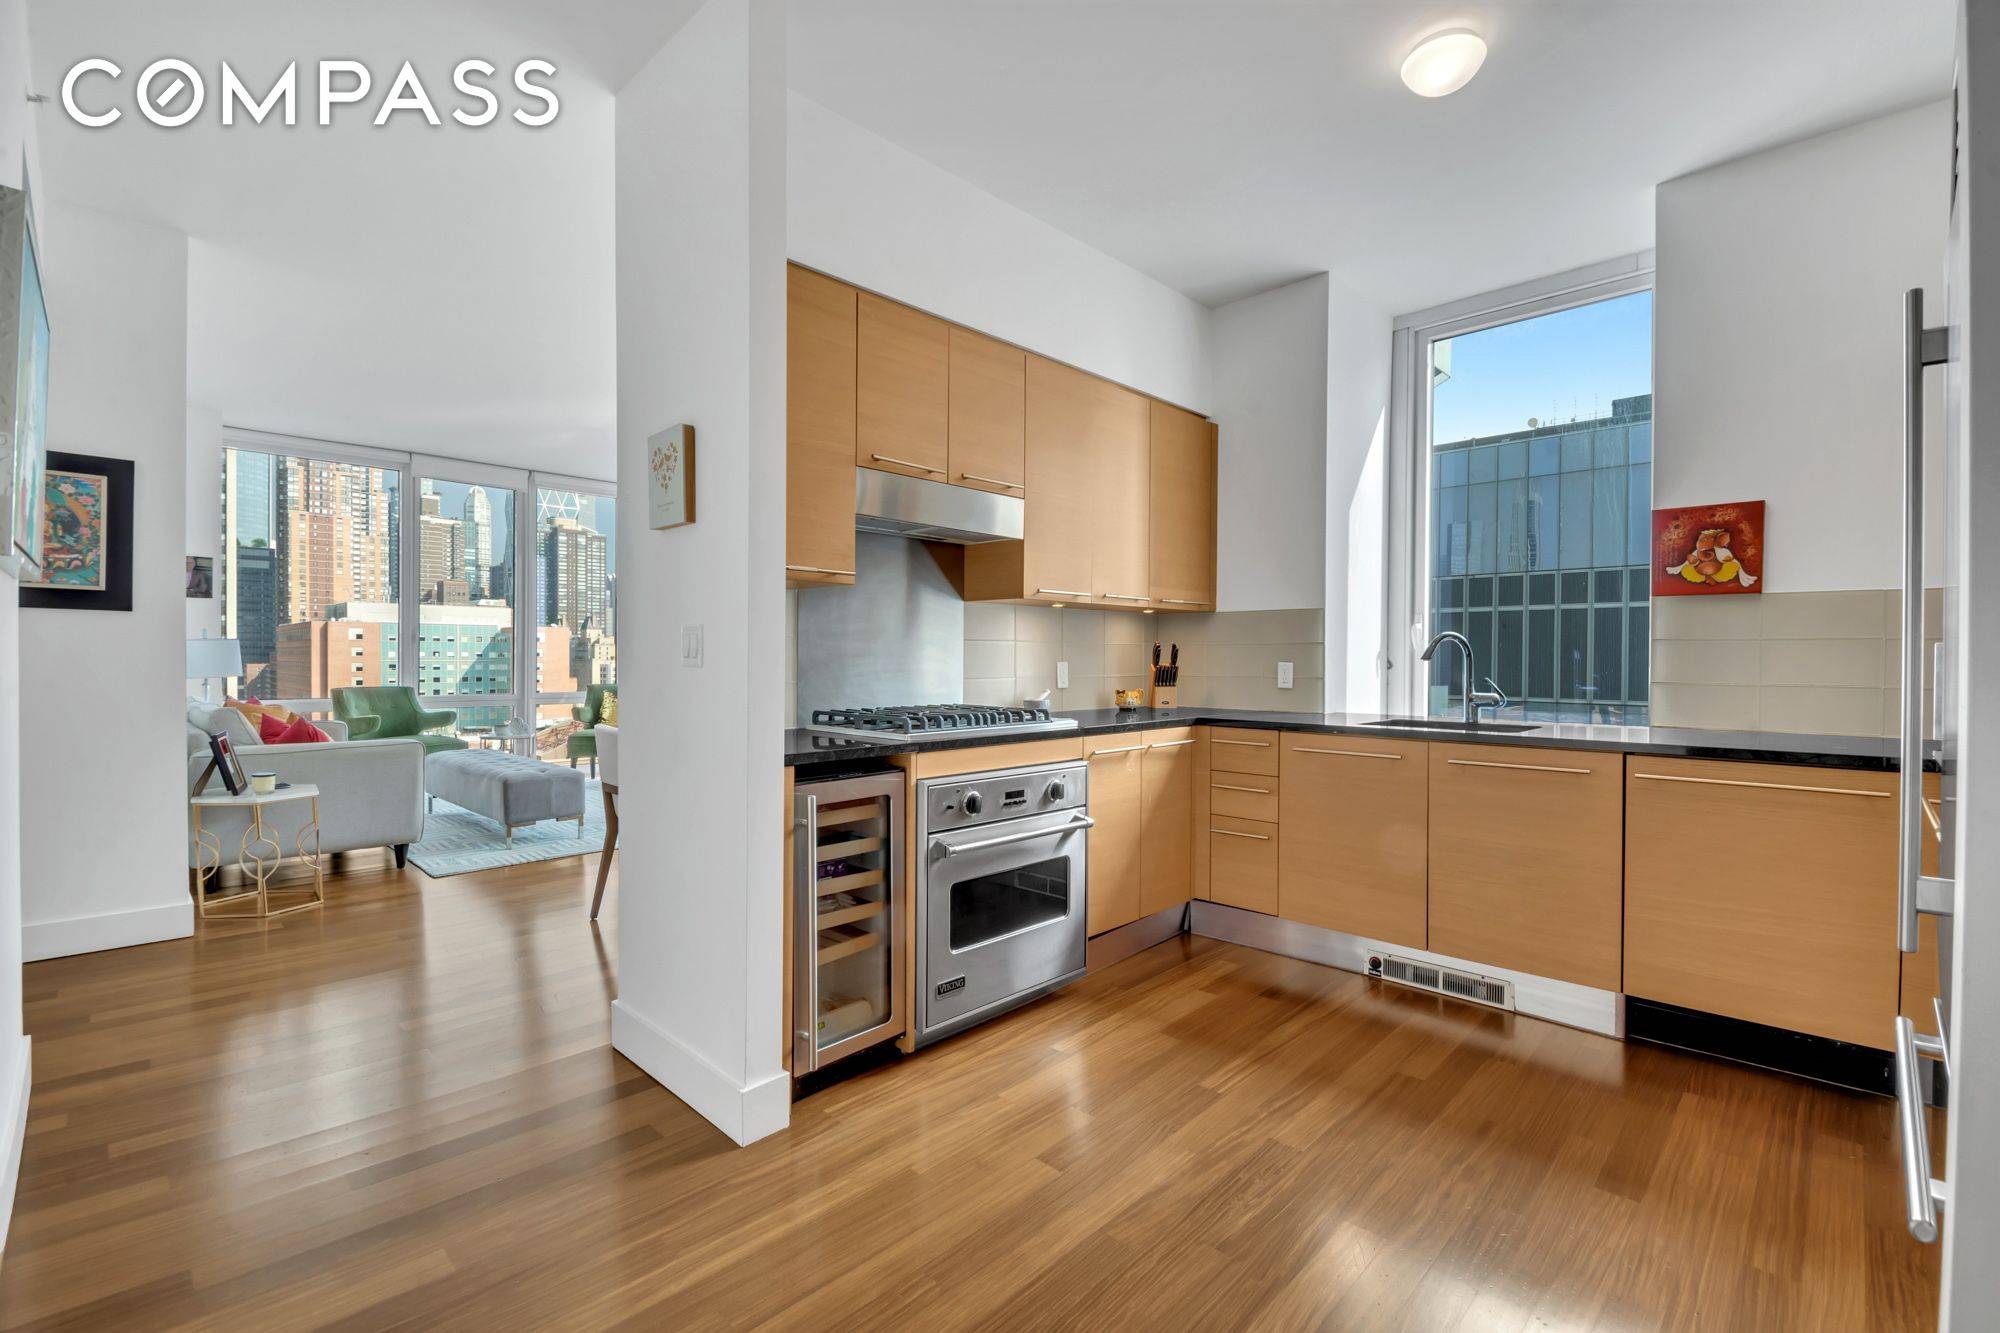 New To Market ! Offered Furnished or Unfurnished Condo Sub let Listing Available at 10 West End Avenue This glass clad, luxury high rise residential building has an impressively scaled ...